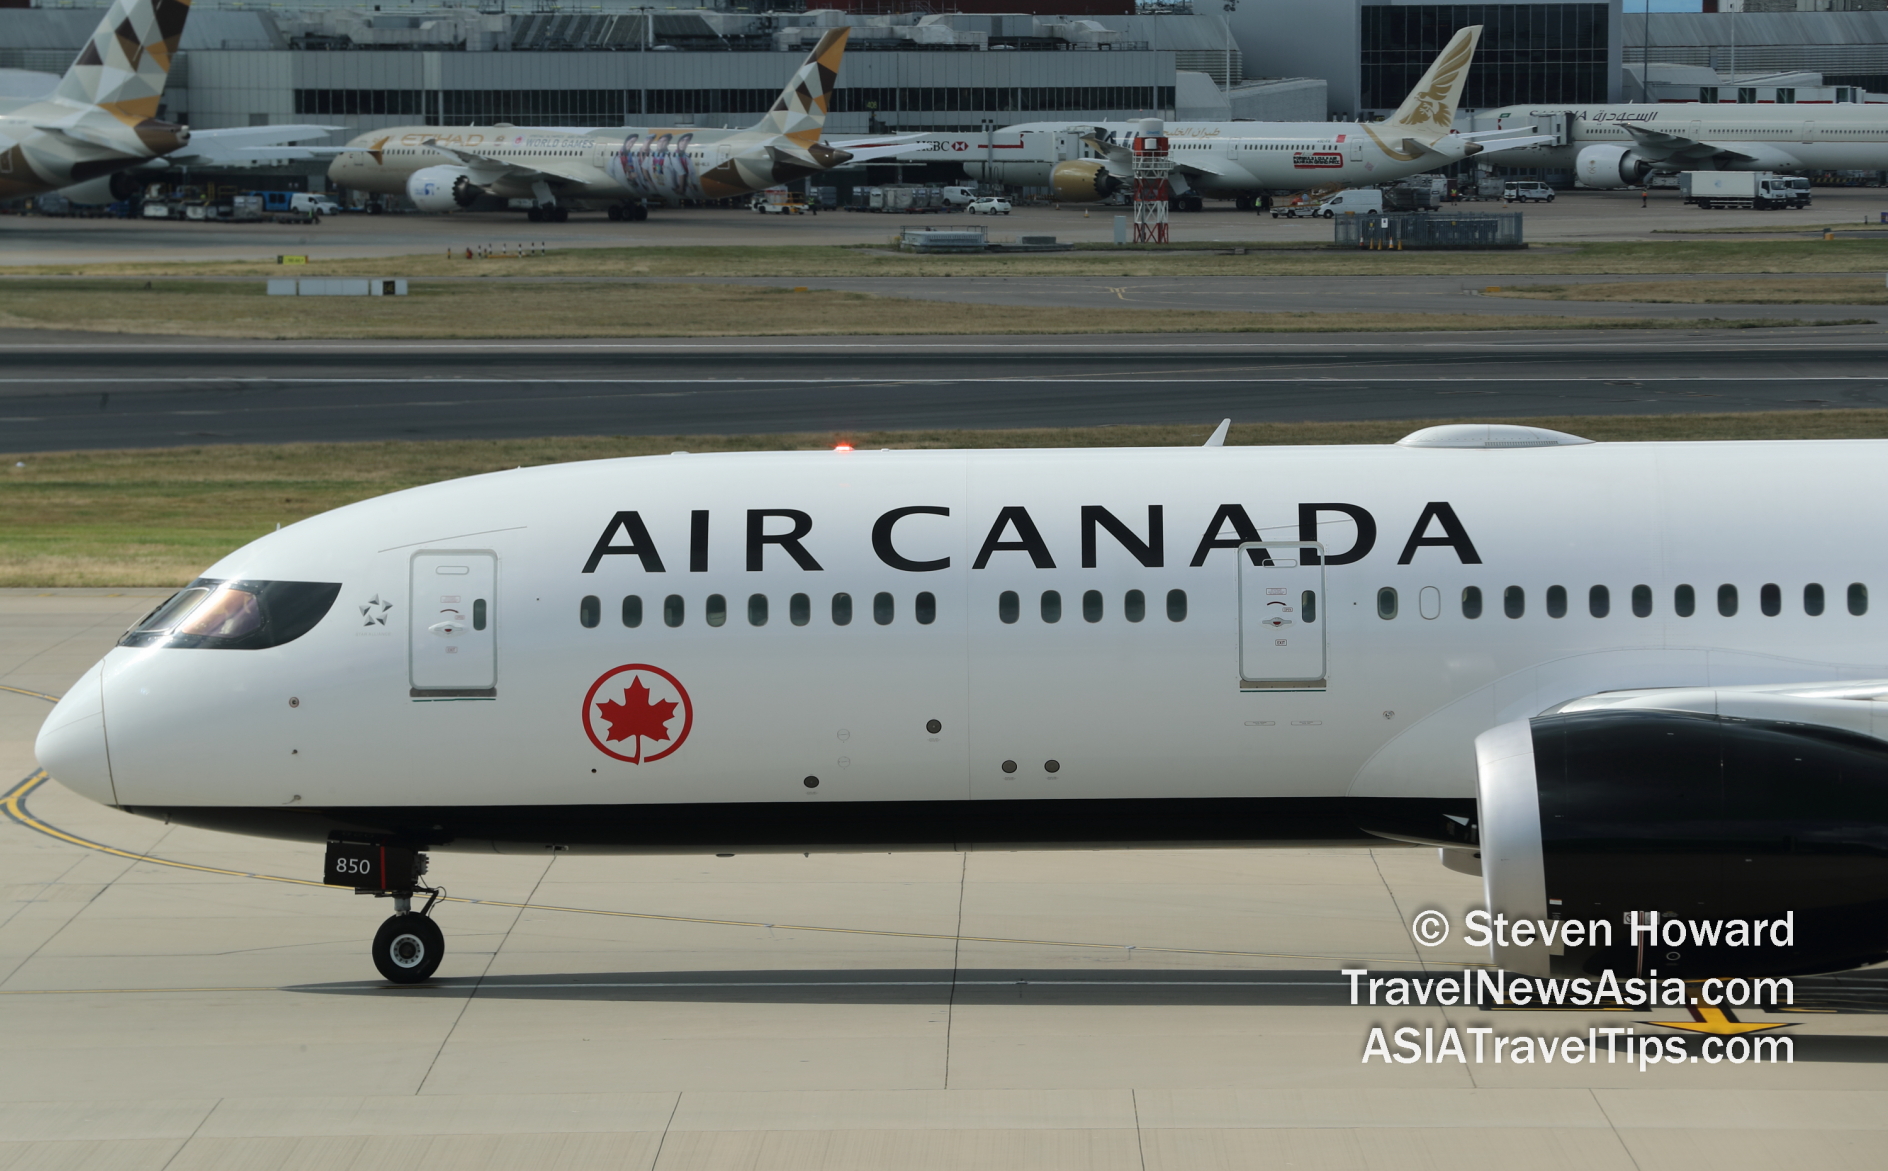 Air Canada Boeing 787-8 reg: C-FRTU. Picture by Steven Howard of TravelNewsAsia.com. Click to enlarge.